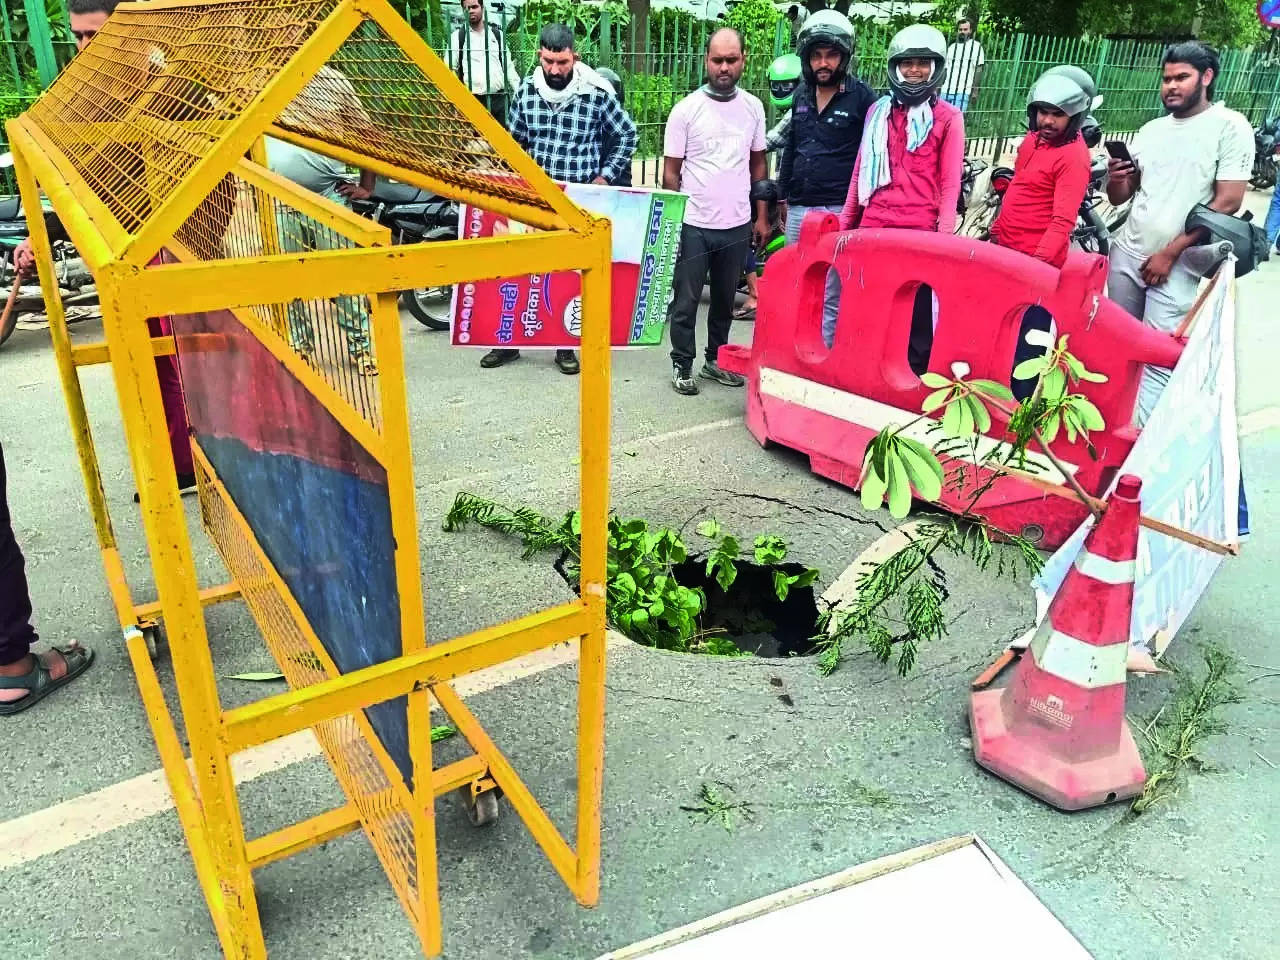 Part of road caves in near Fortis hospital; will carry out detailed probe, says GMDA